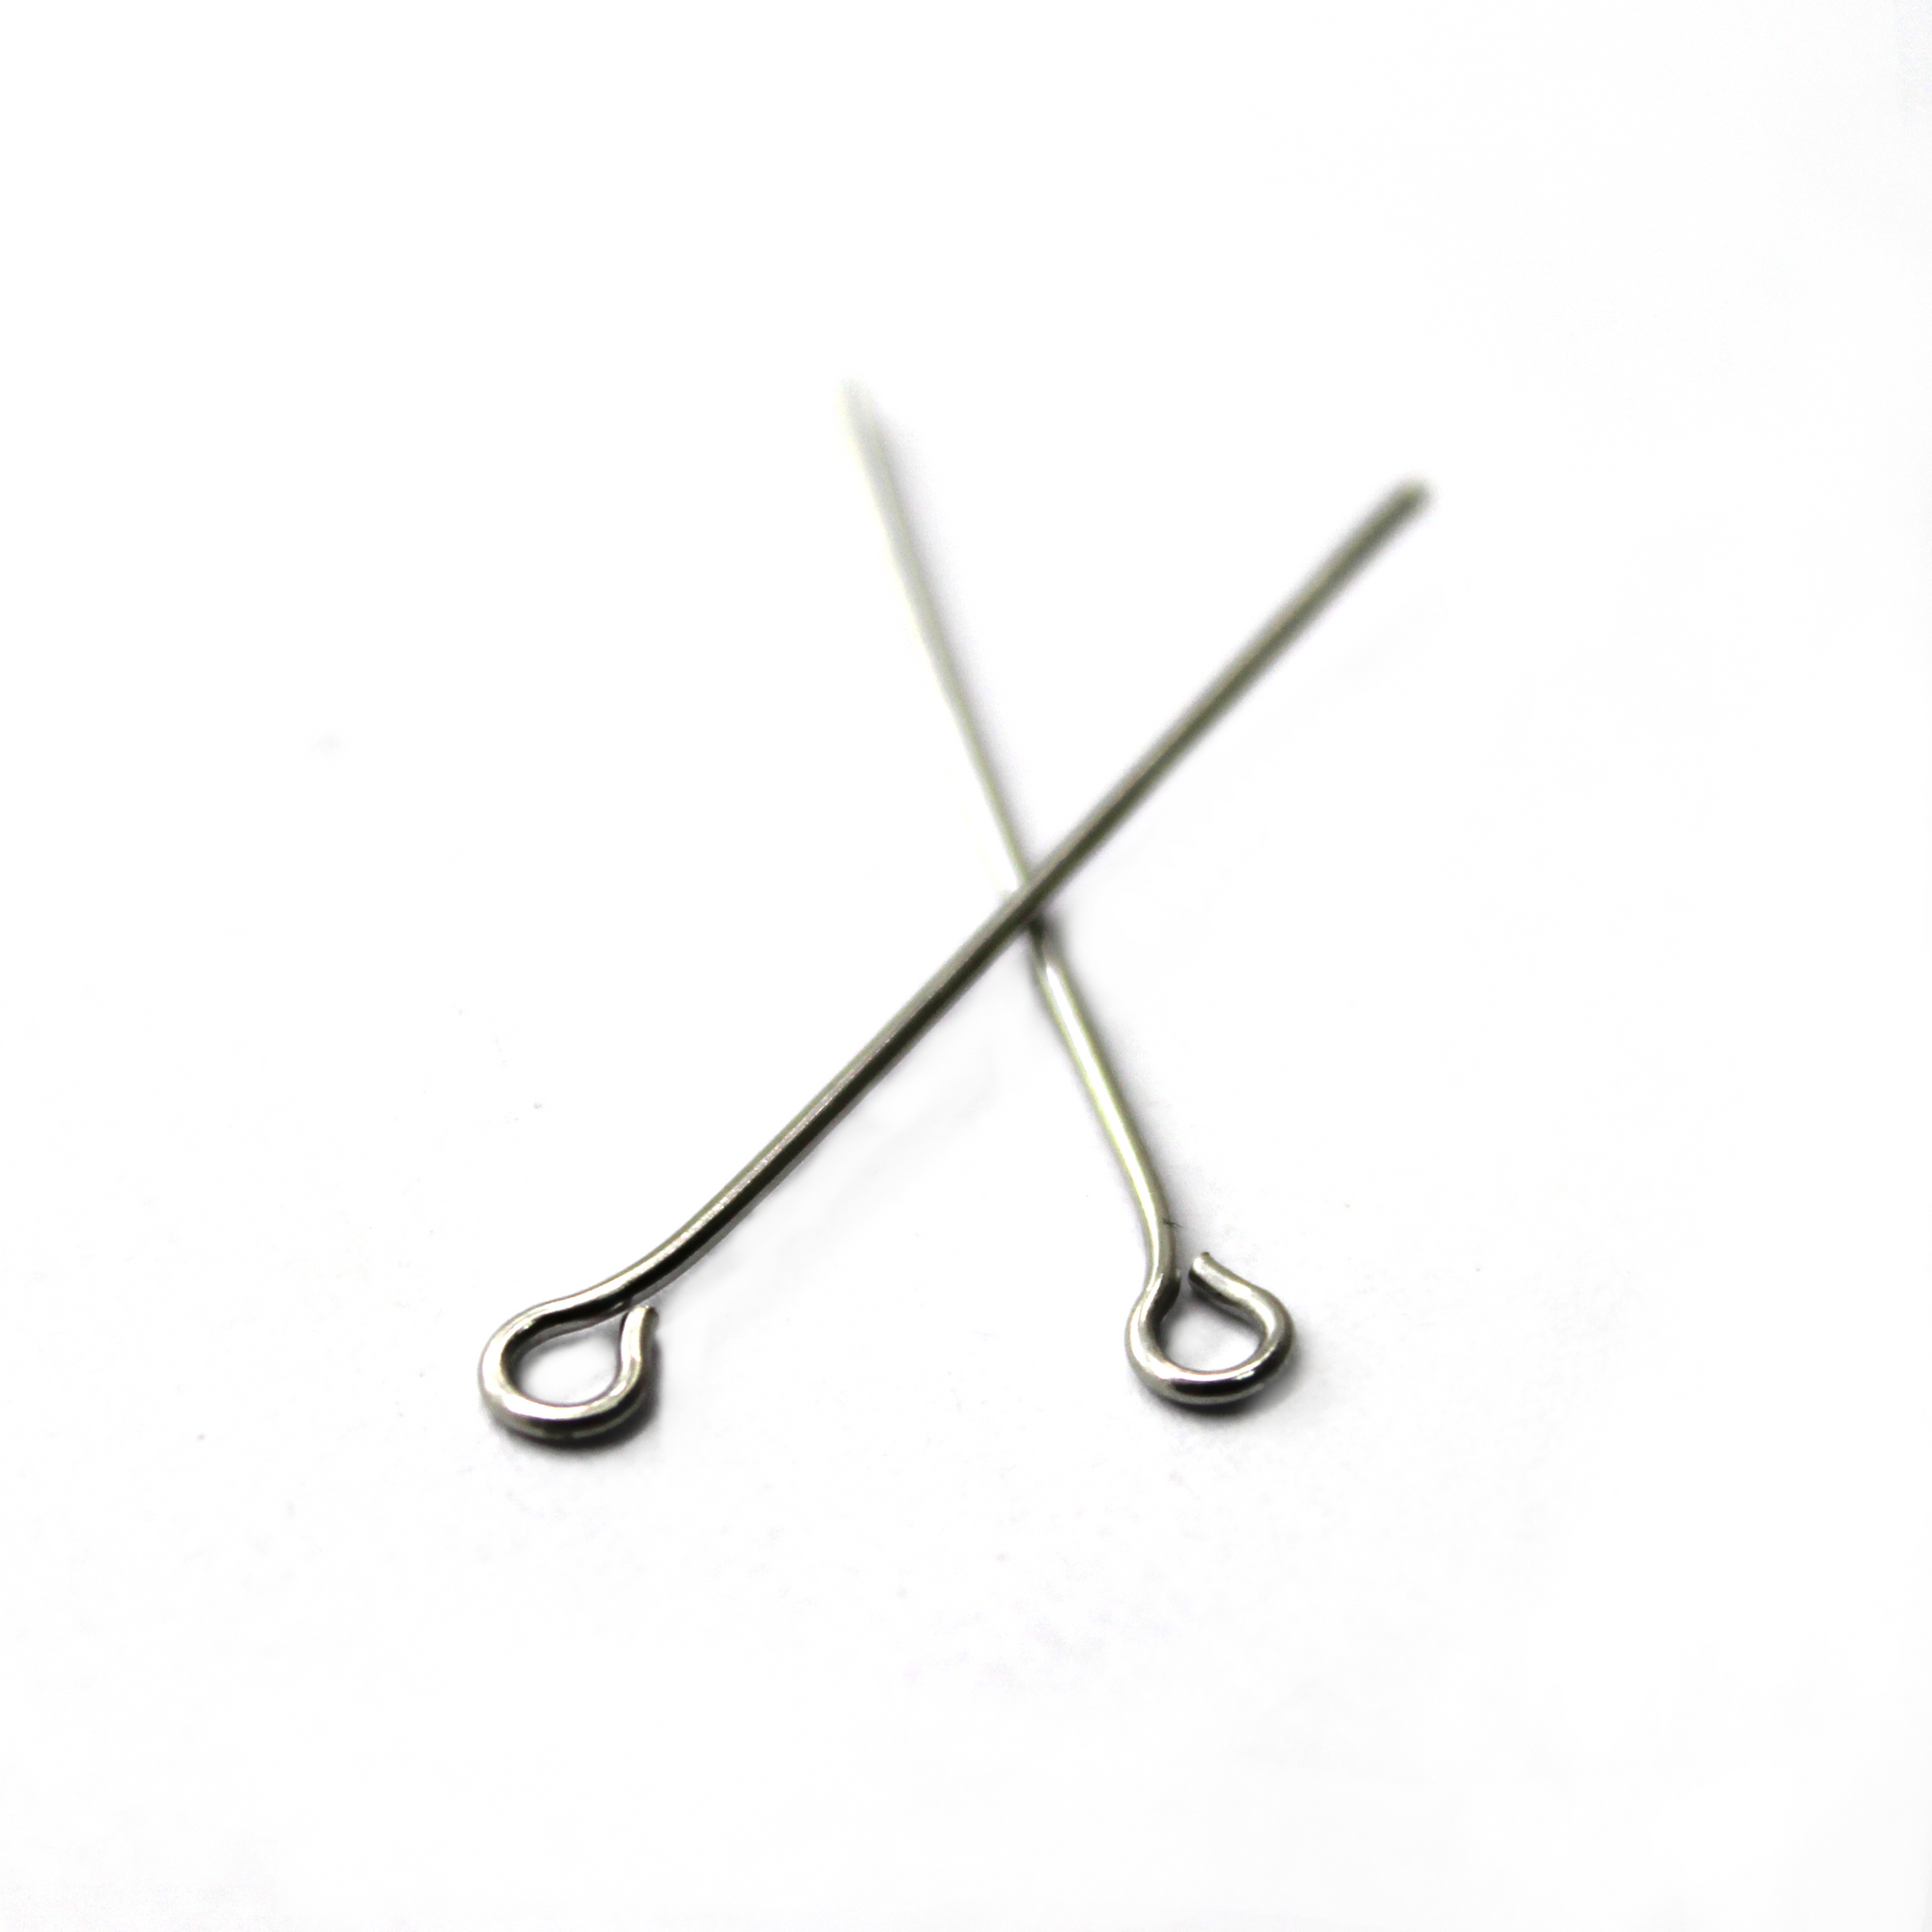 Eye Pins, Silver, Stainless Steel, 1.38 inches, 22 Gauge, Sold Per pkg of Approx 180 pcs